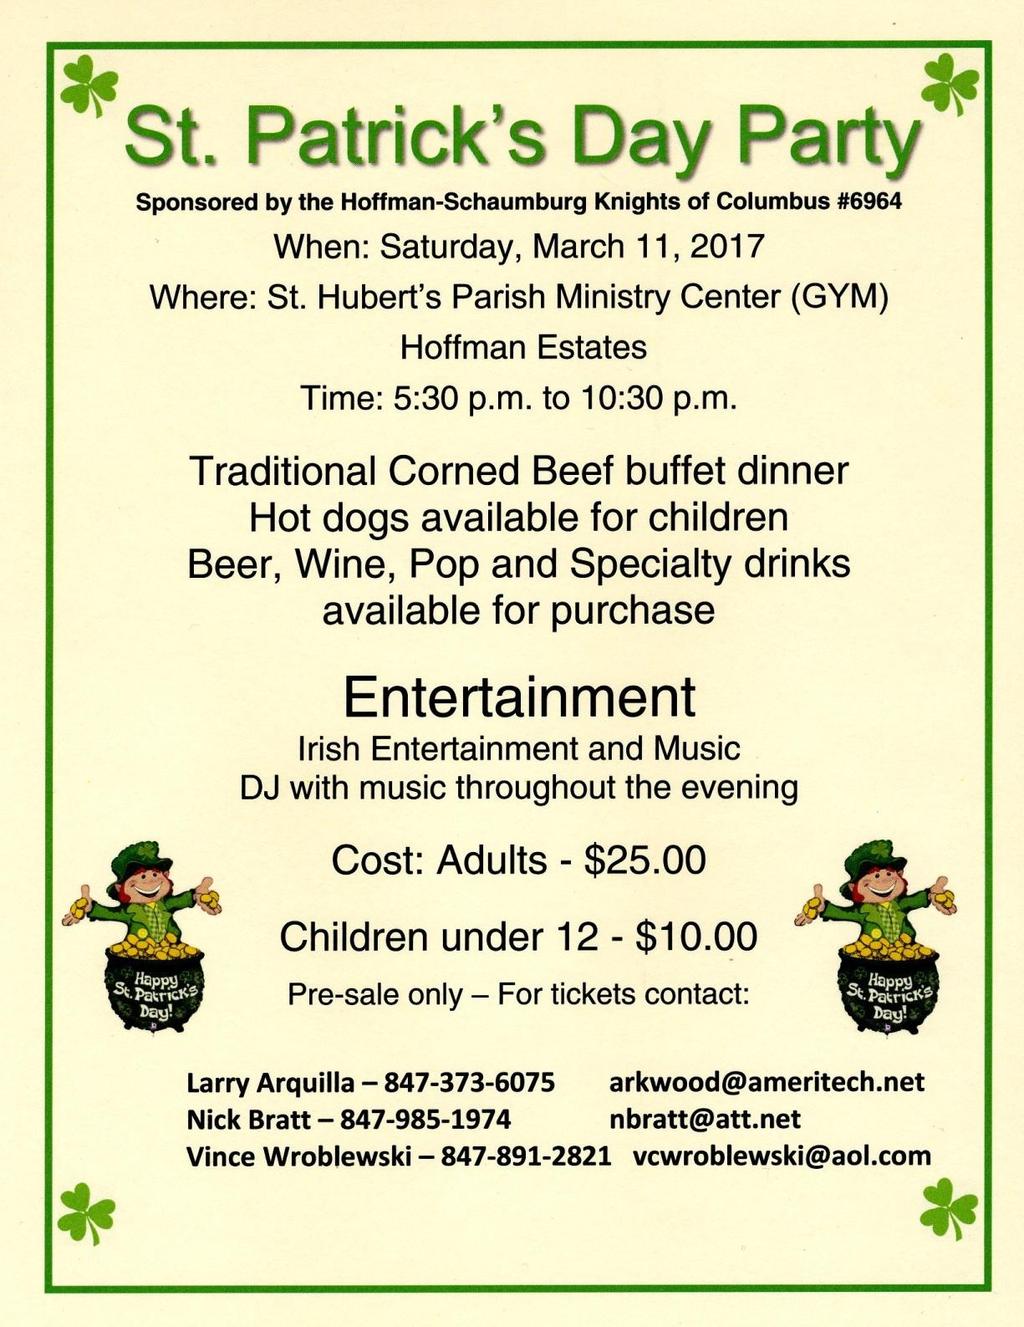 St. Patrick's Day Party: On Sunday, March 11, 2017 our Knights of Columbus Council 6964 will be hosting their annual St. Patrick's Day Party at St. Hubert's in the Ministry Center (GYM).